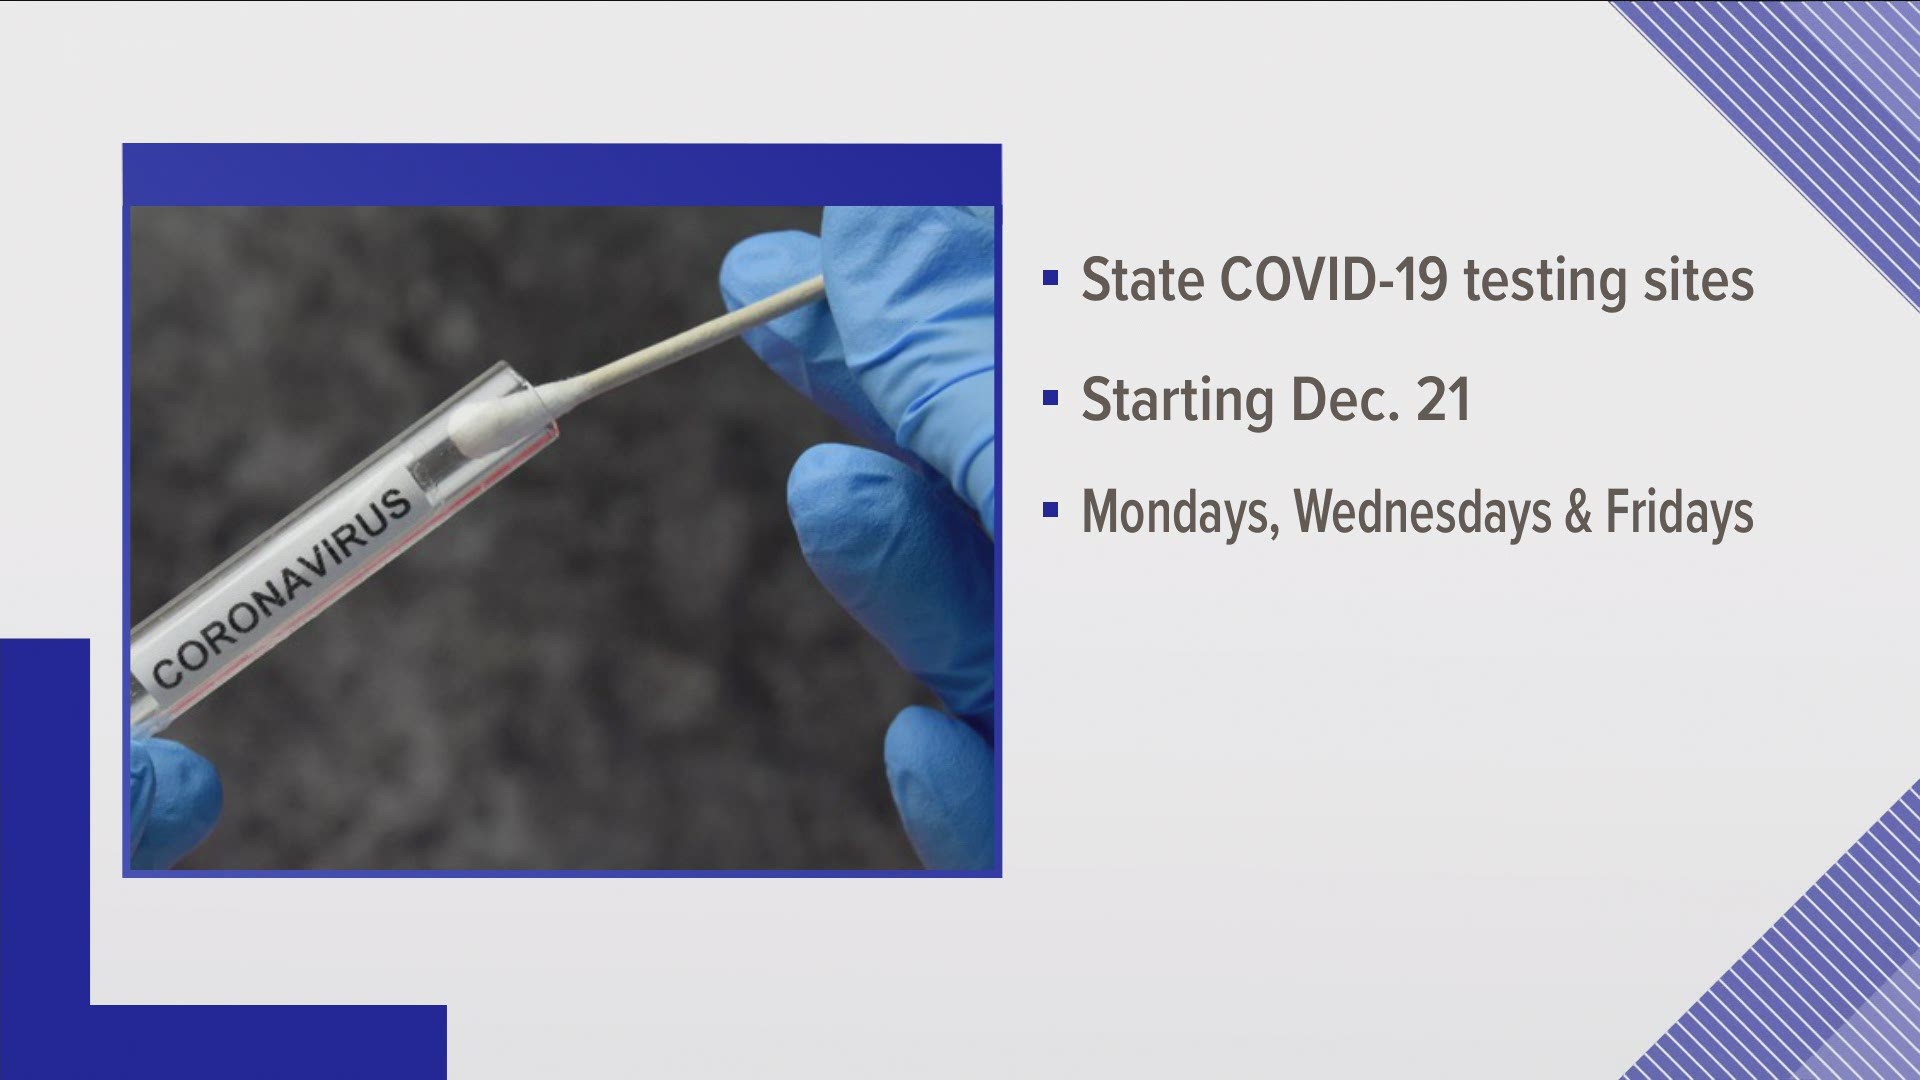 State COVID-19 testing sites will soon offer self-testing kits to adults three days a week.